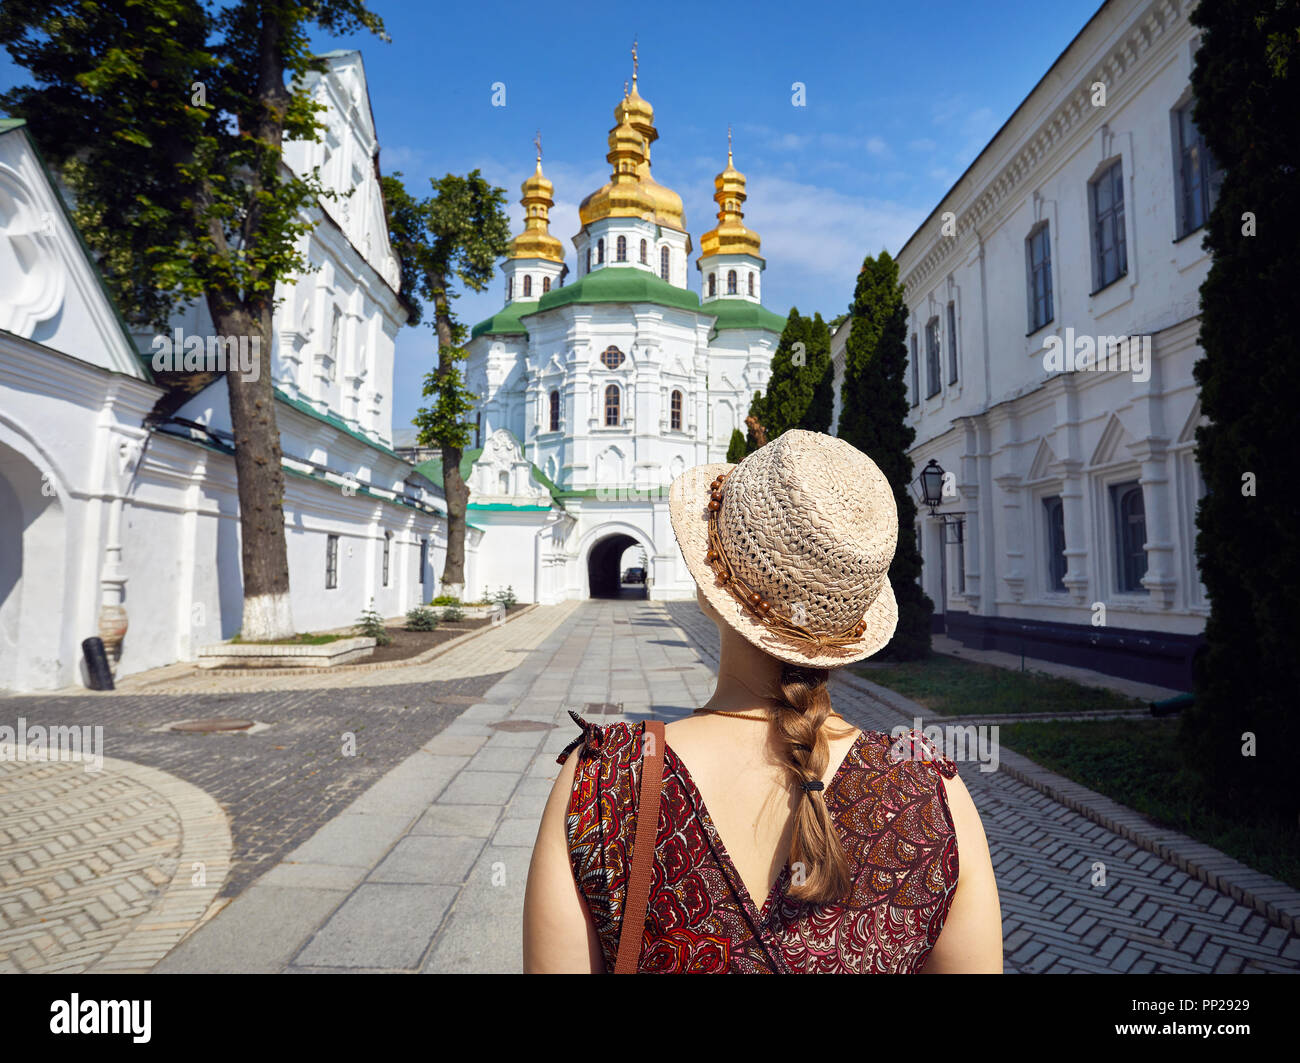 Woman in hat looking at Church with golden domes at Kiev Pechersk Lavra Christian complex. Old historical architecture in Kiev, Ukraine Stock Photo